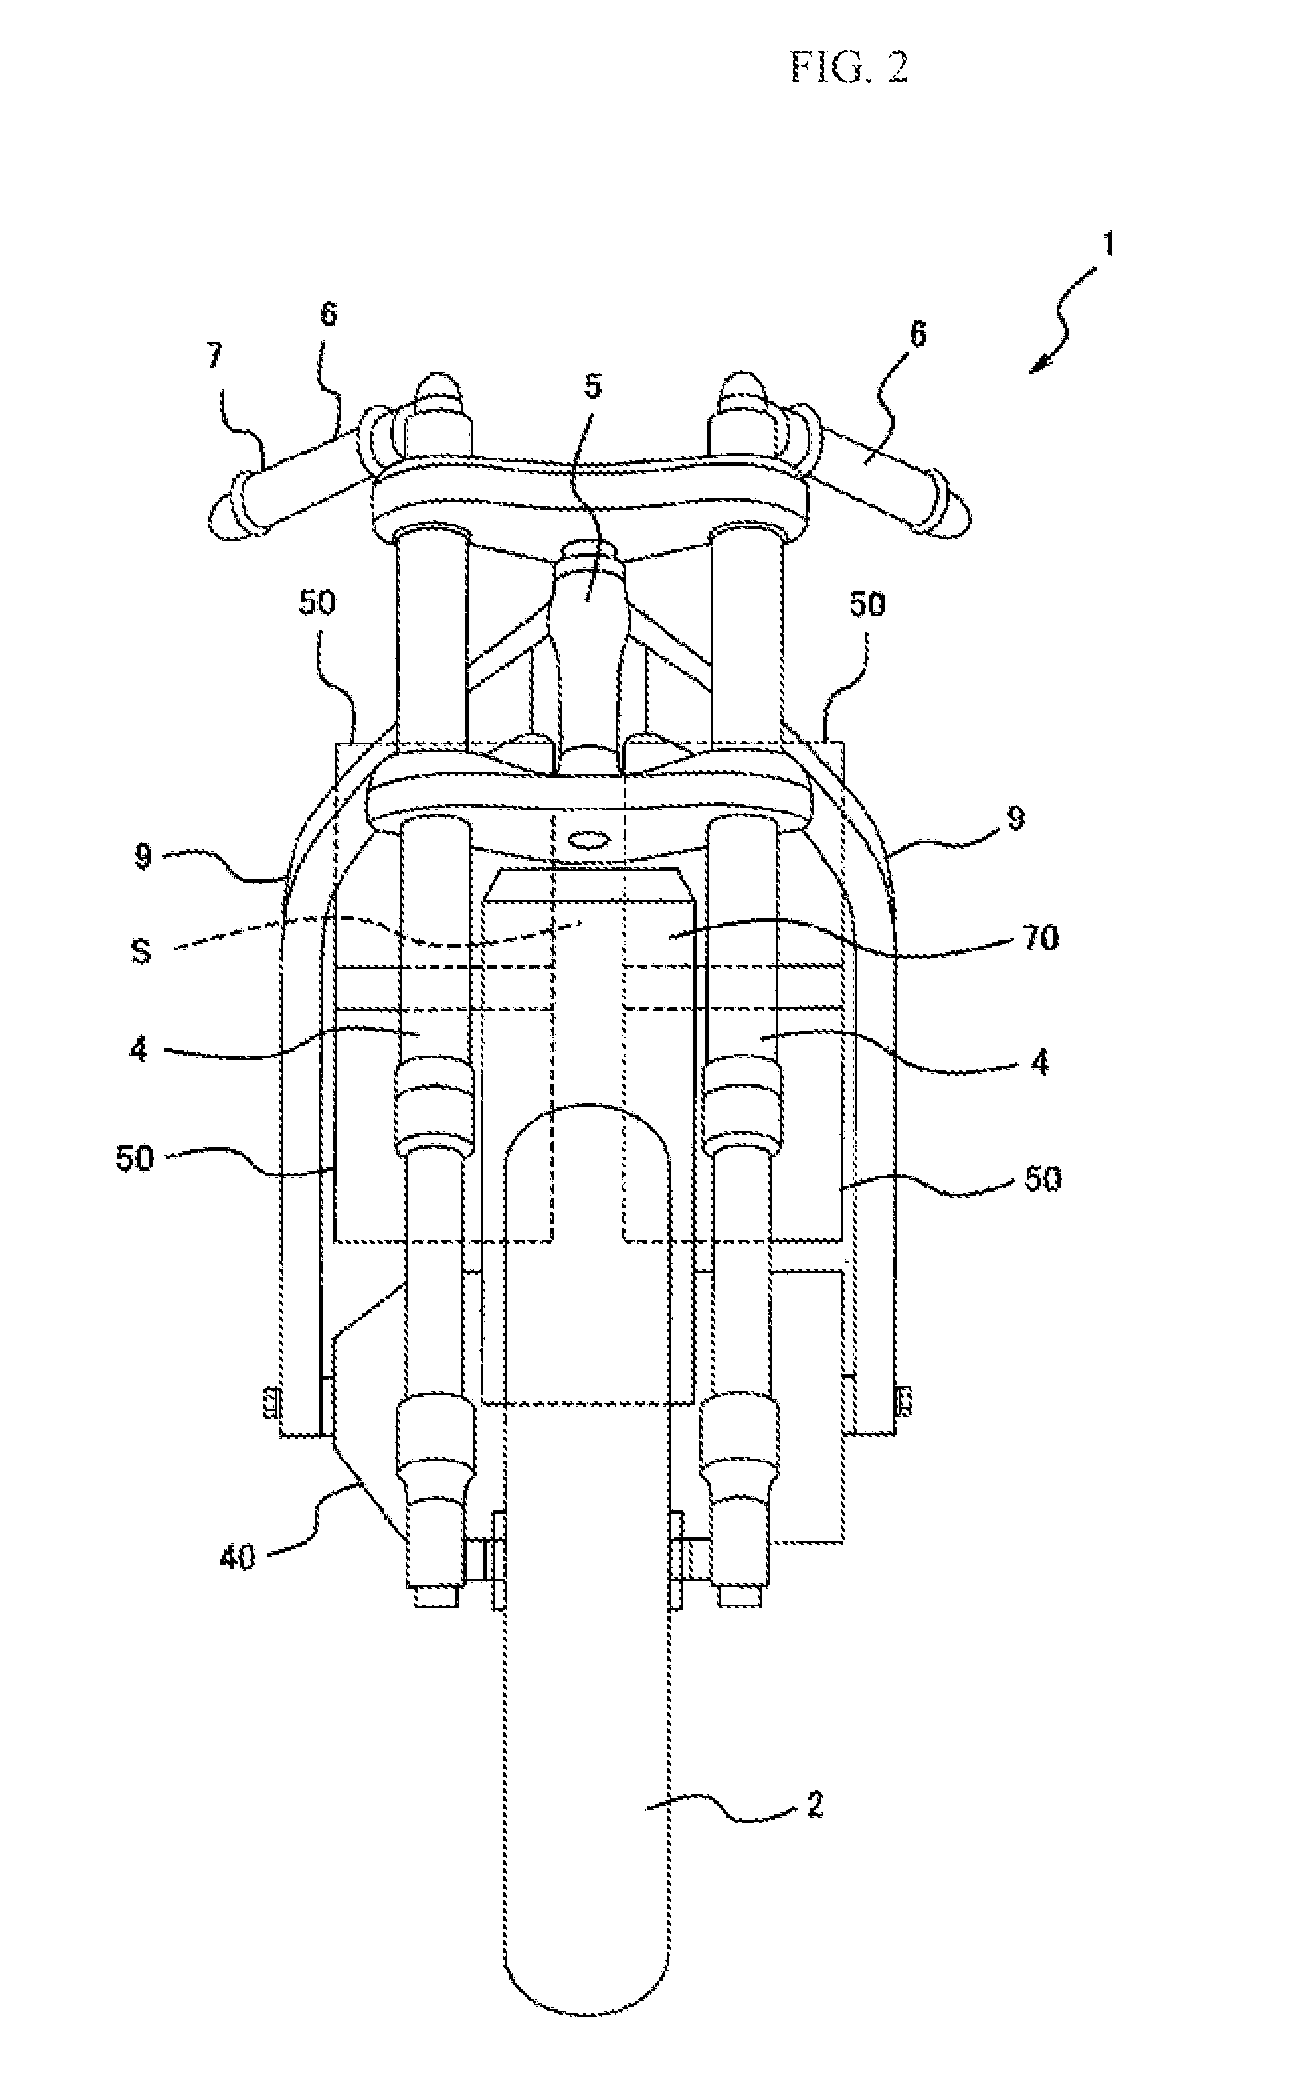 Cooling structure for electric vehicle